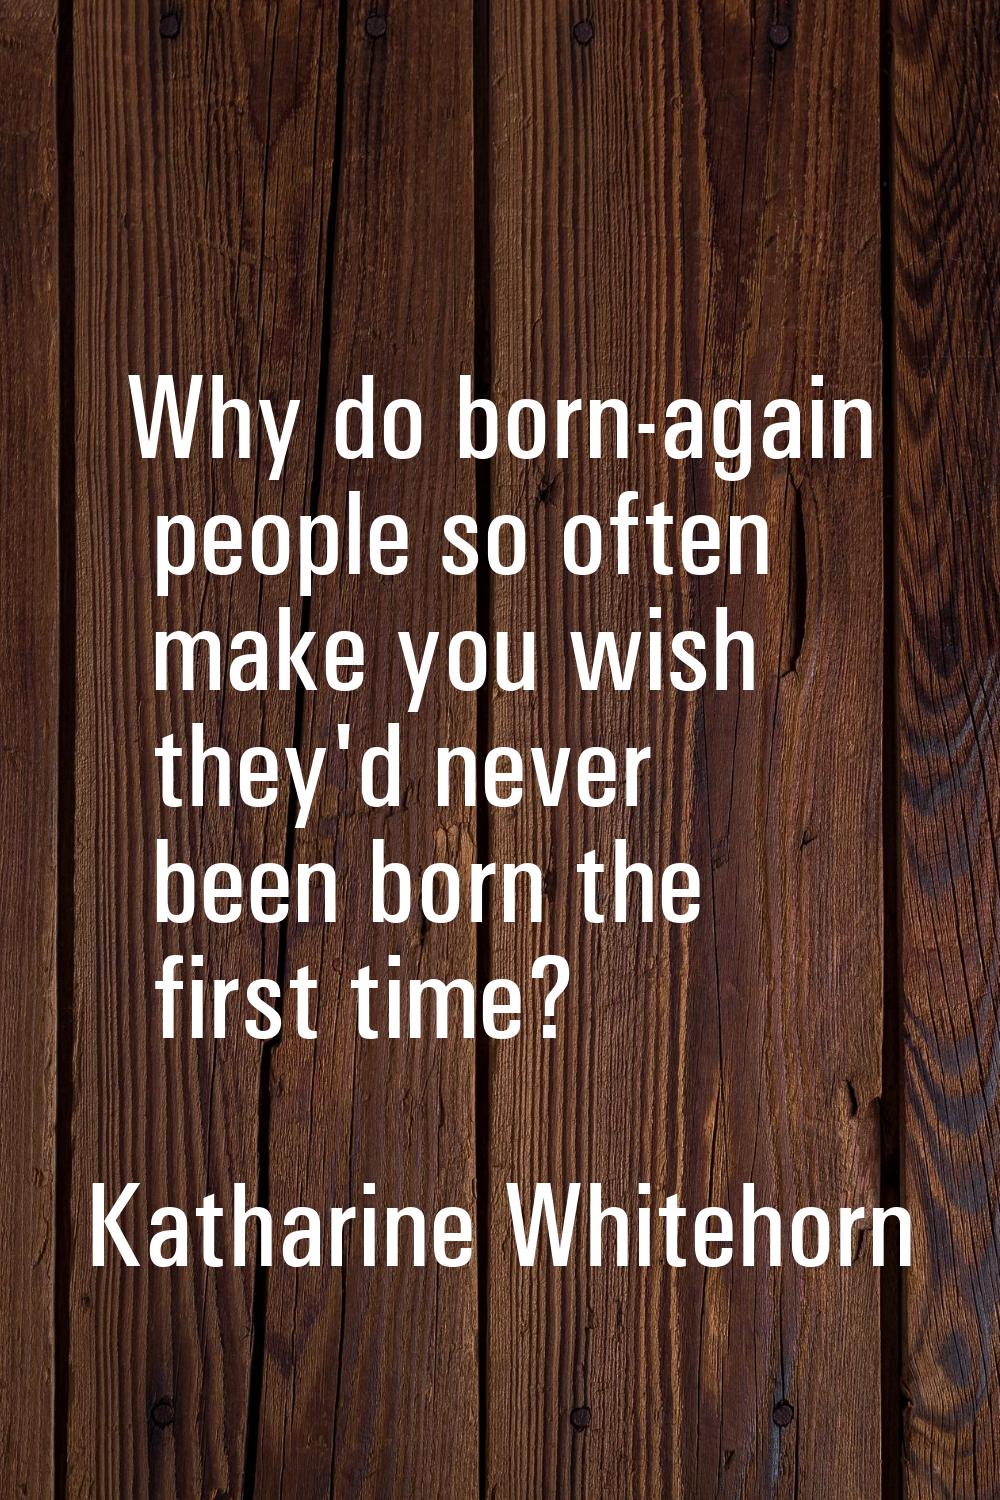 Why do born-again people so often make you wish they'd never been born the first time?